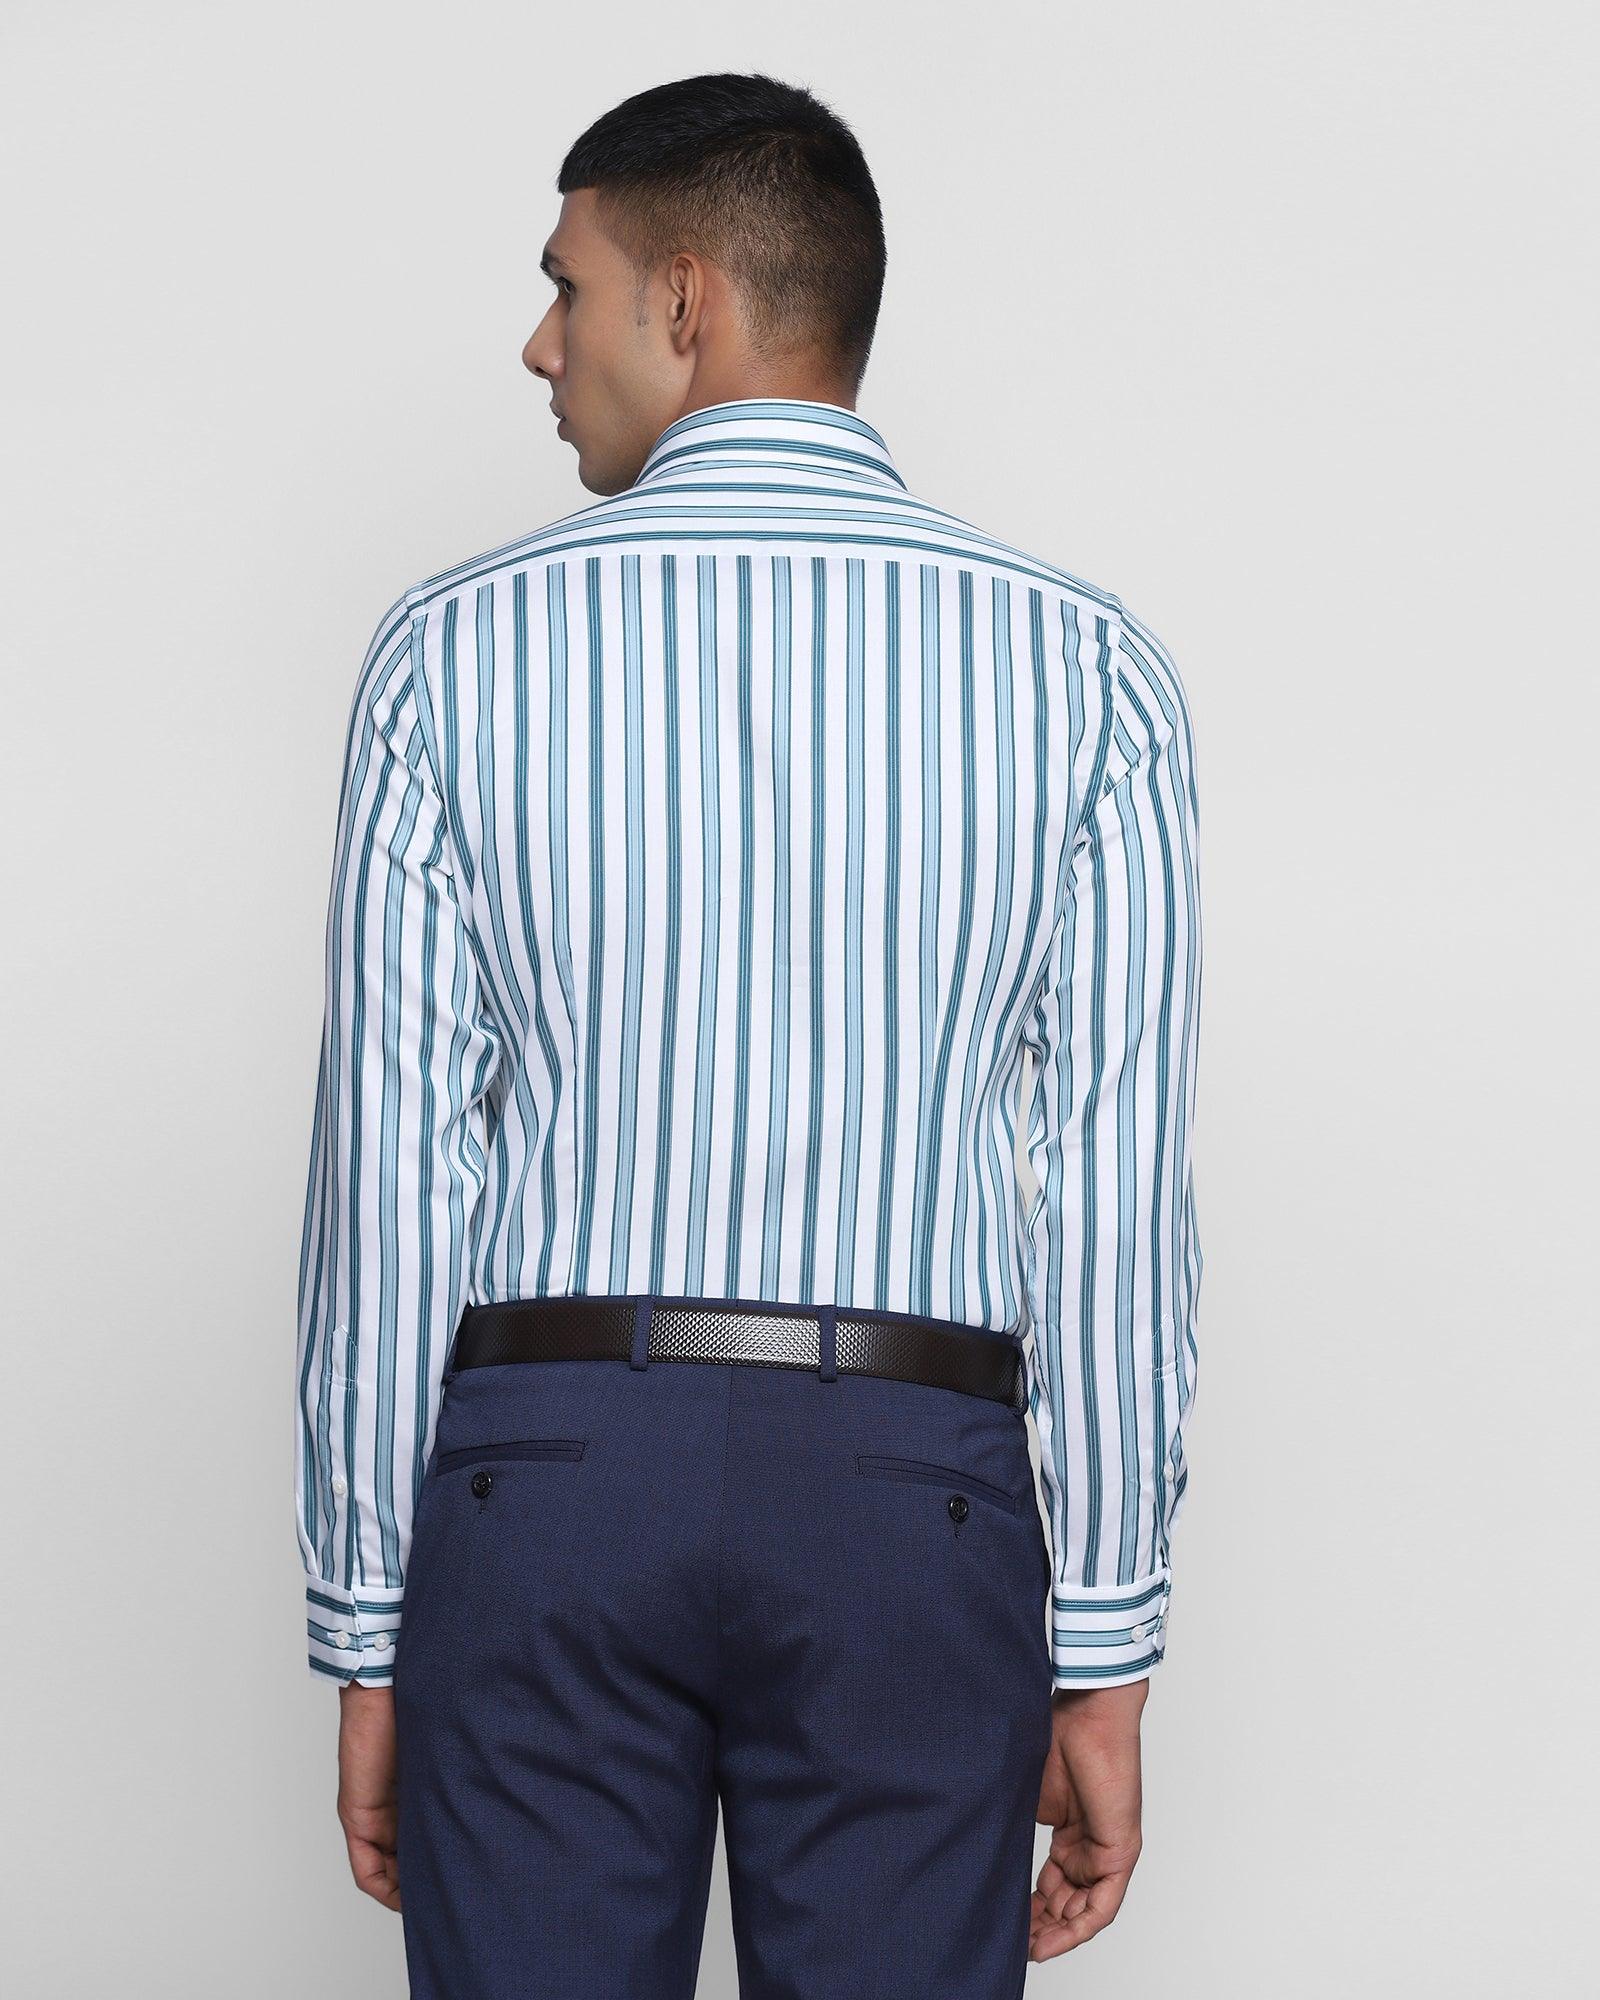 Formal White Striped Shirt - Gloster